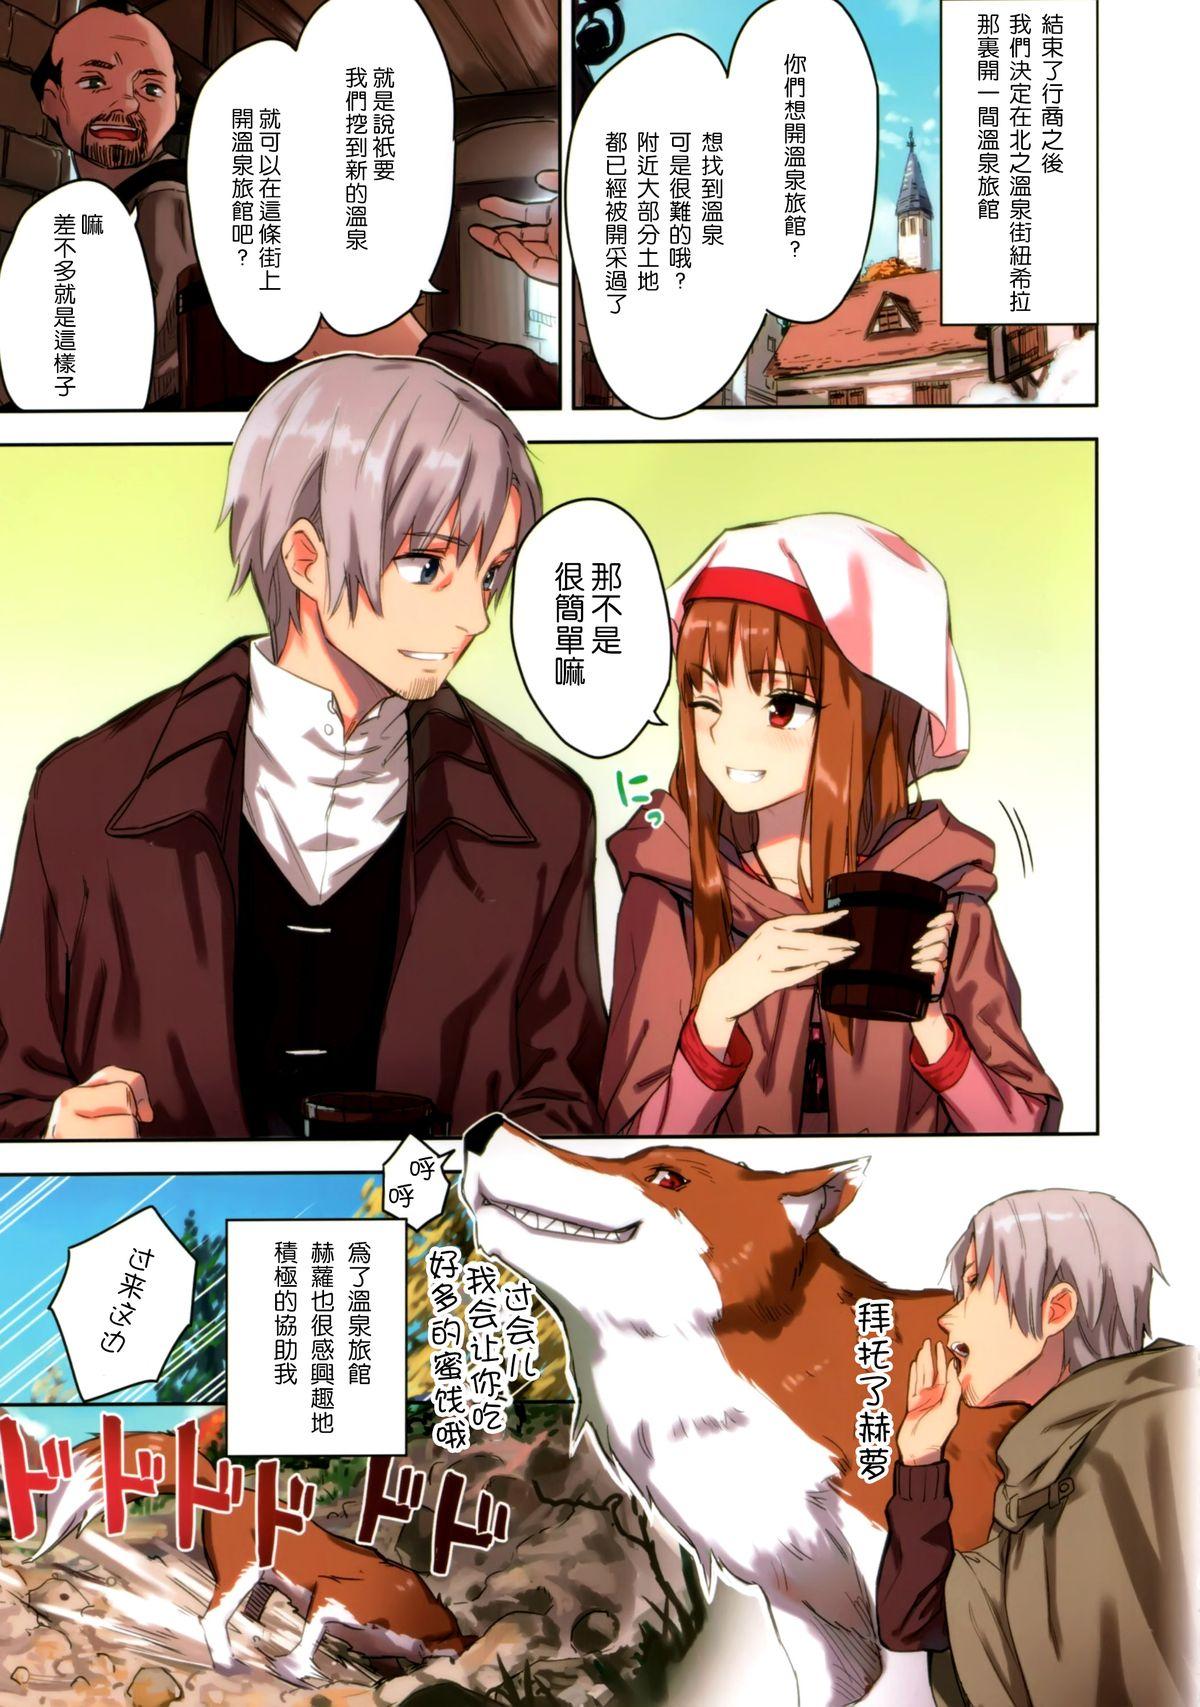 Sologirl Wacchi to Nyohhira Bon FULL COLOR - Spice and wolf Fucking - Page 6